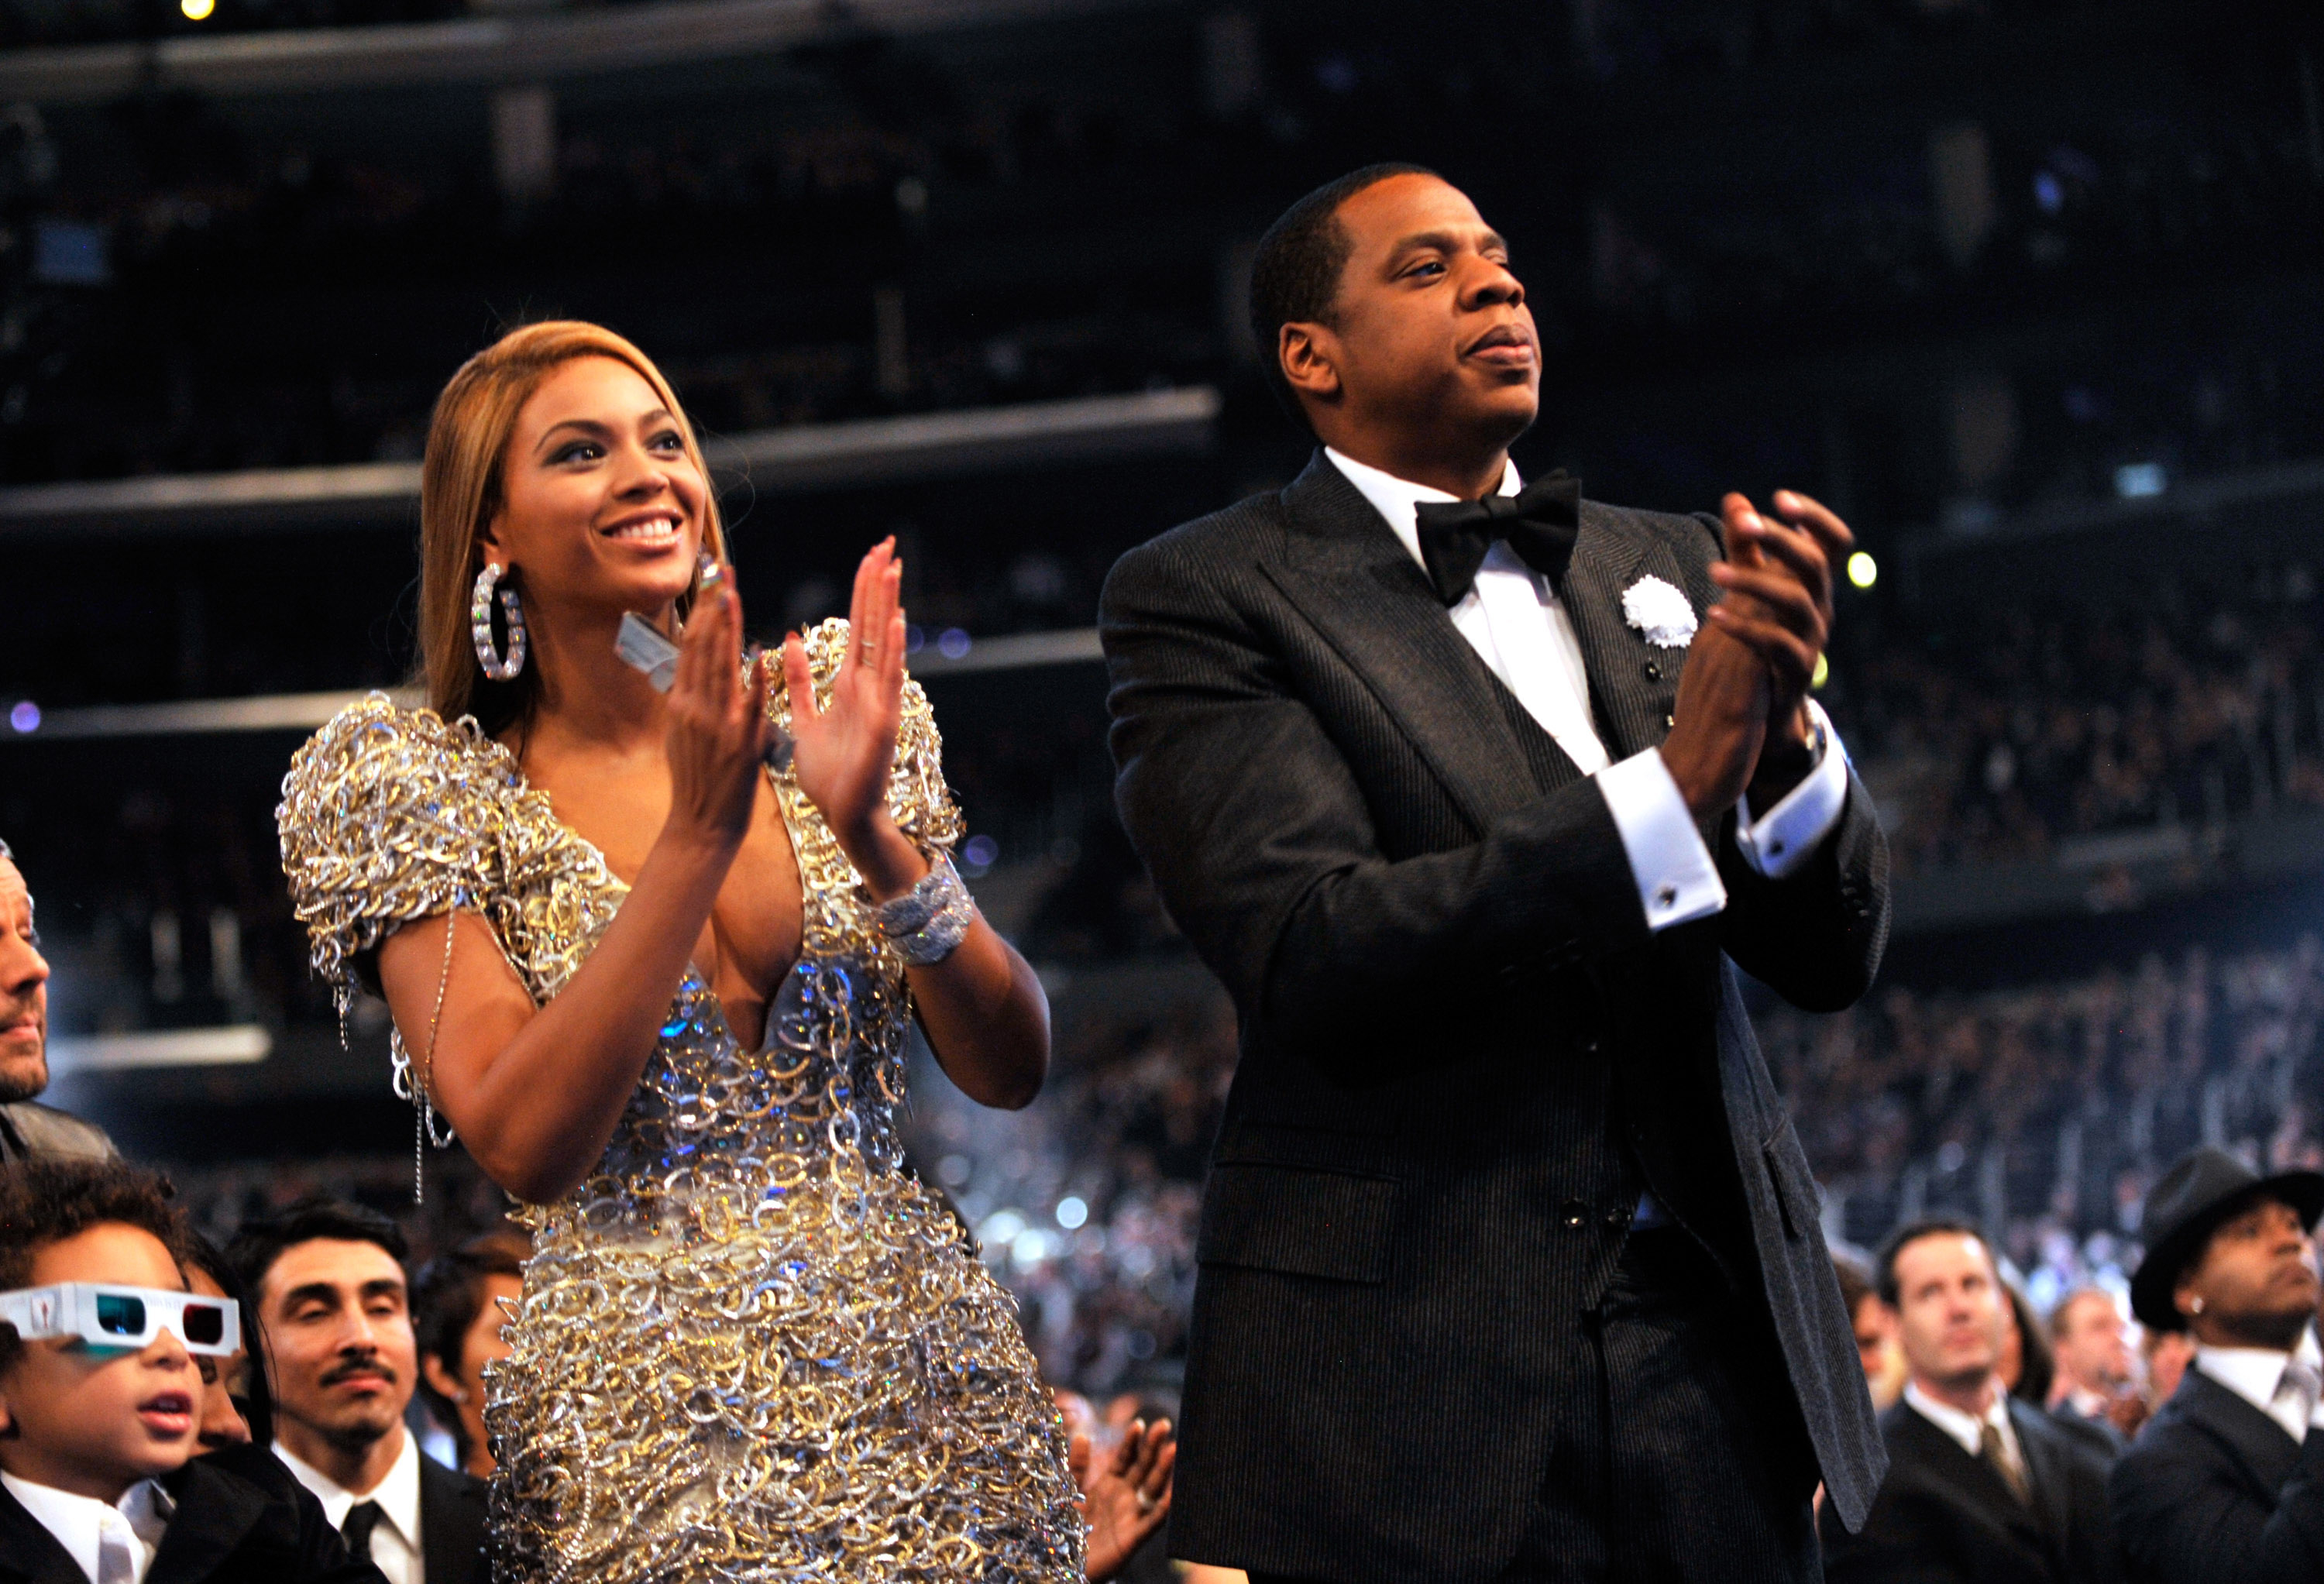 Beyoncé and Jay-Z clapping